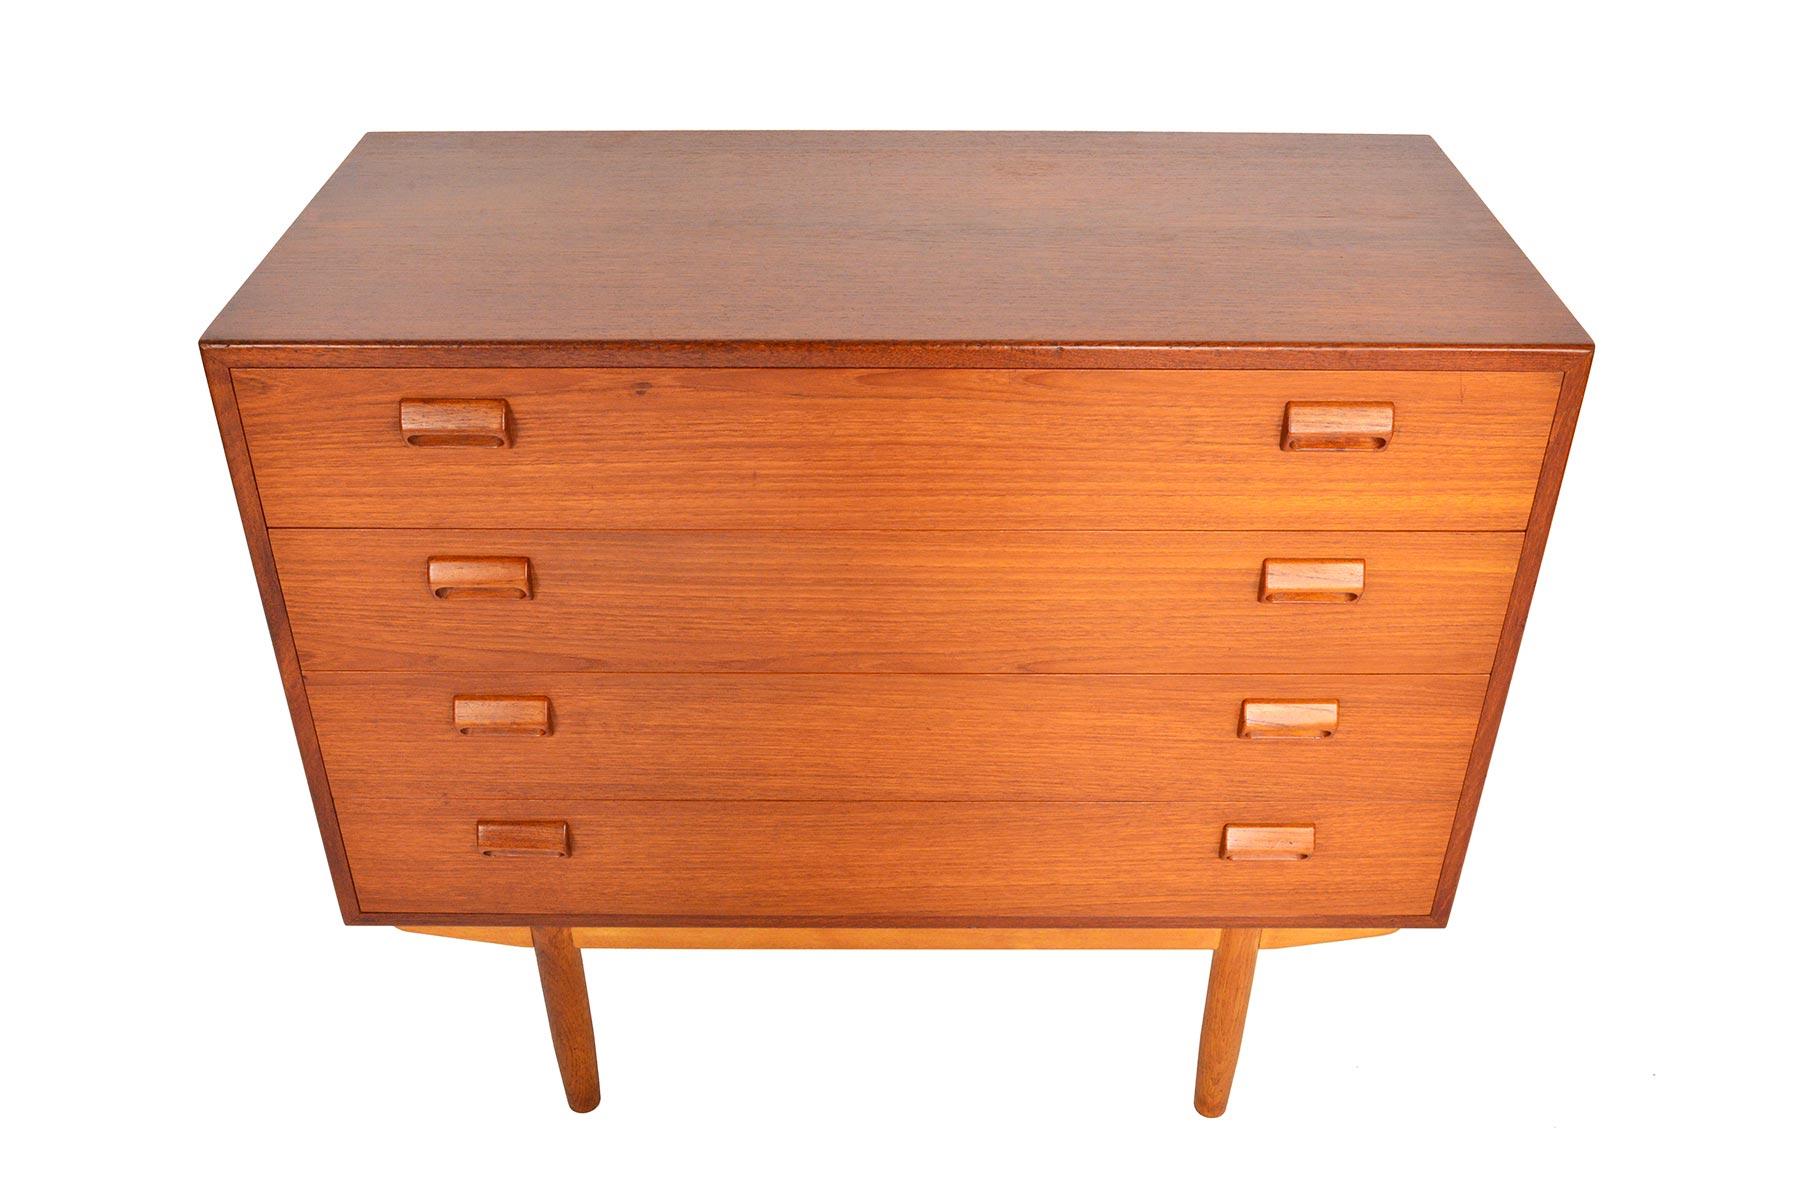 This beautiful gentleman’s chest was designed by Børge Mogensen for Søborg Møbelfabrik in 1951. The case is expertly crafted in teak and stands on a solid oak base. Each drawer front is adorned with the designer’s signature handles. Four deep